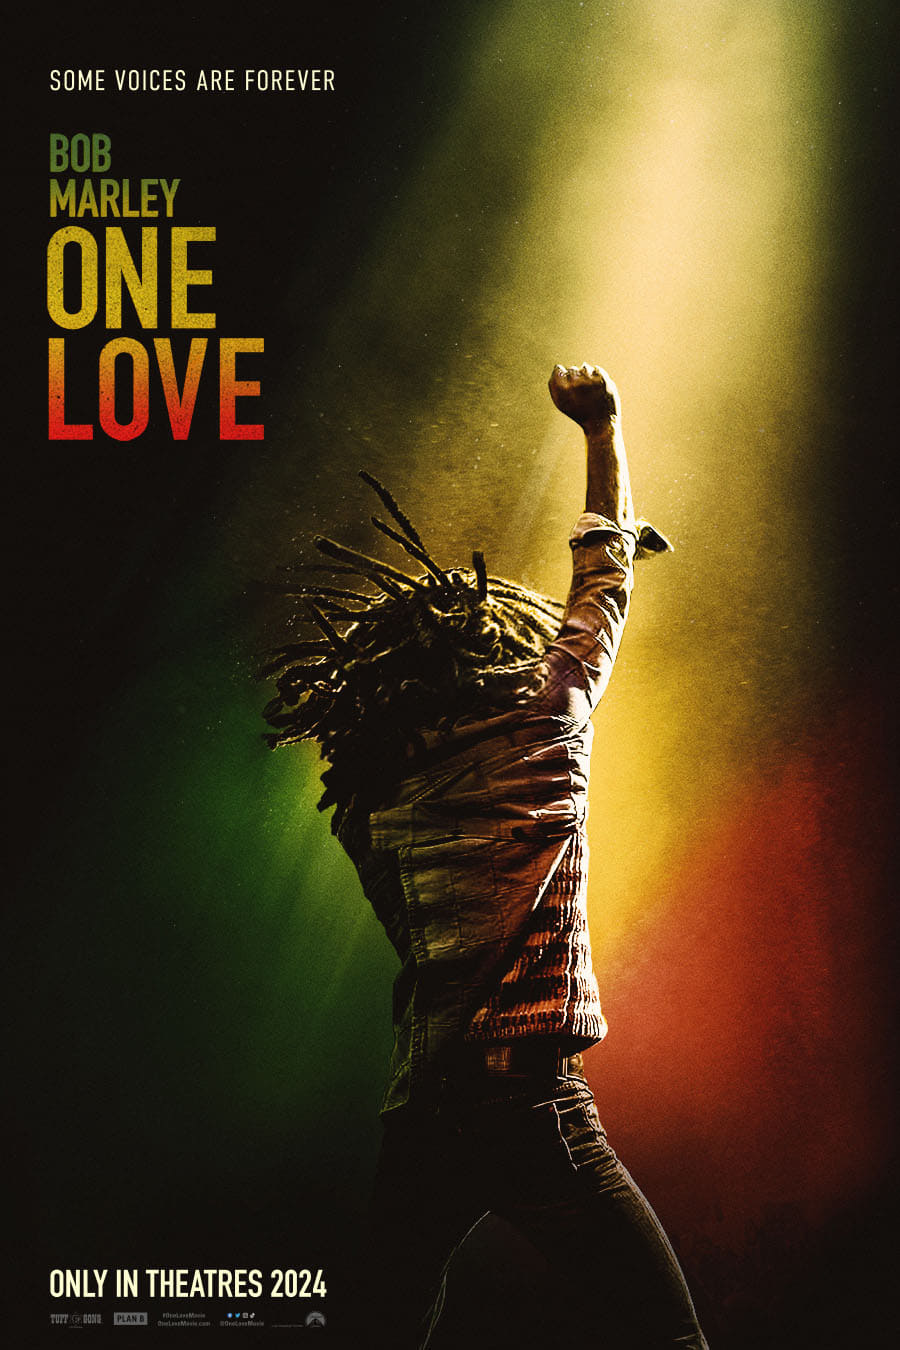 Poster for the movie "Bob Marley: One Love"